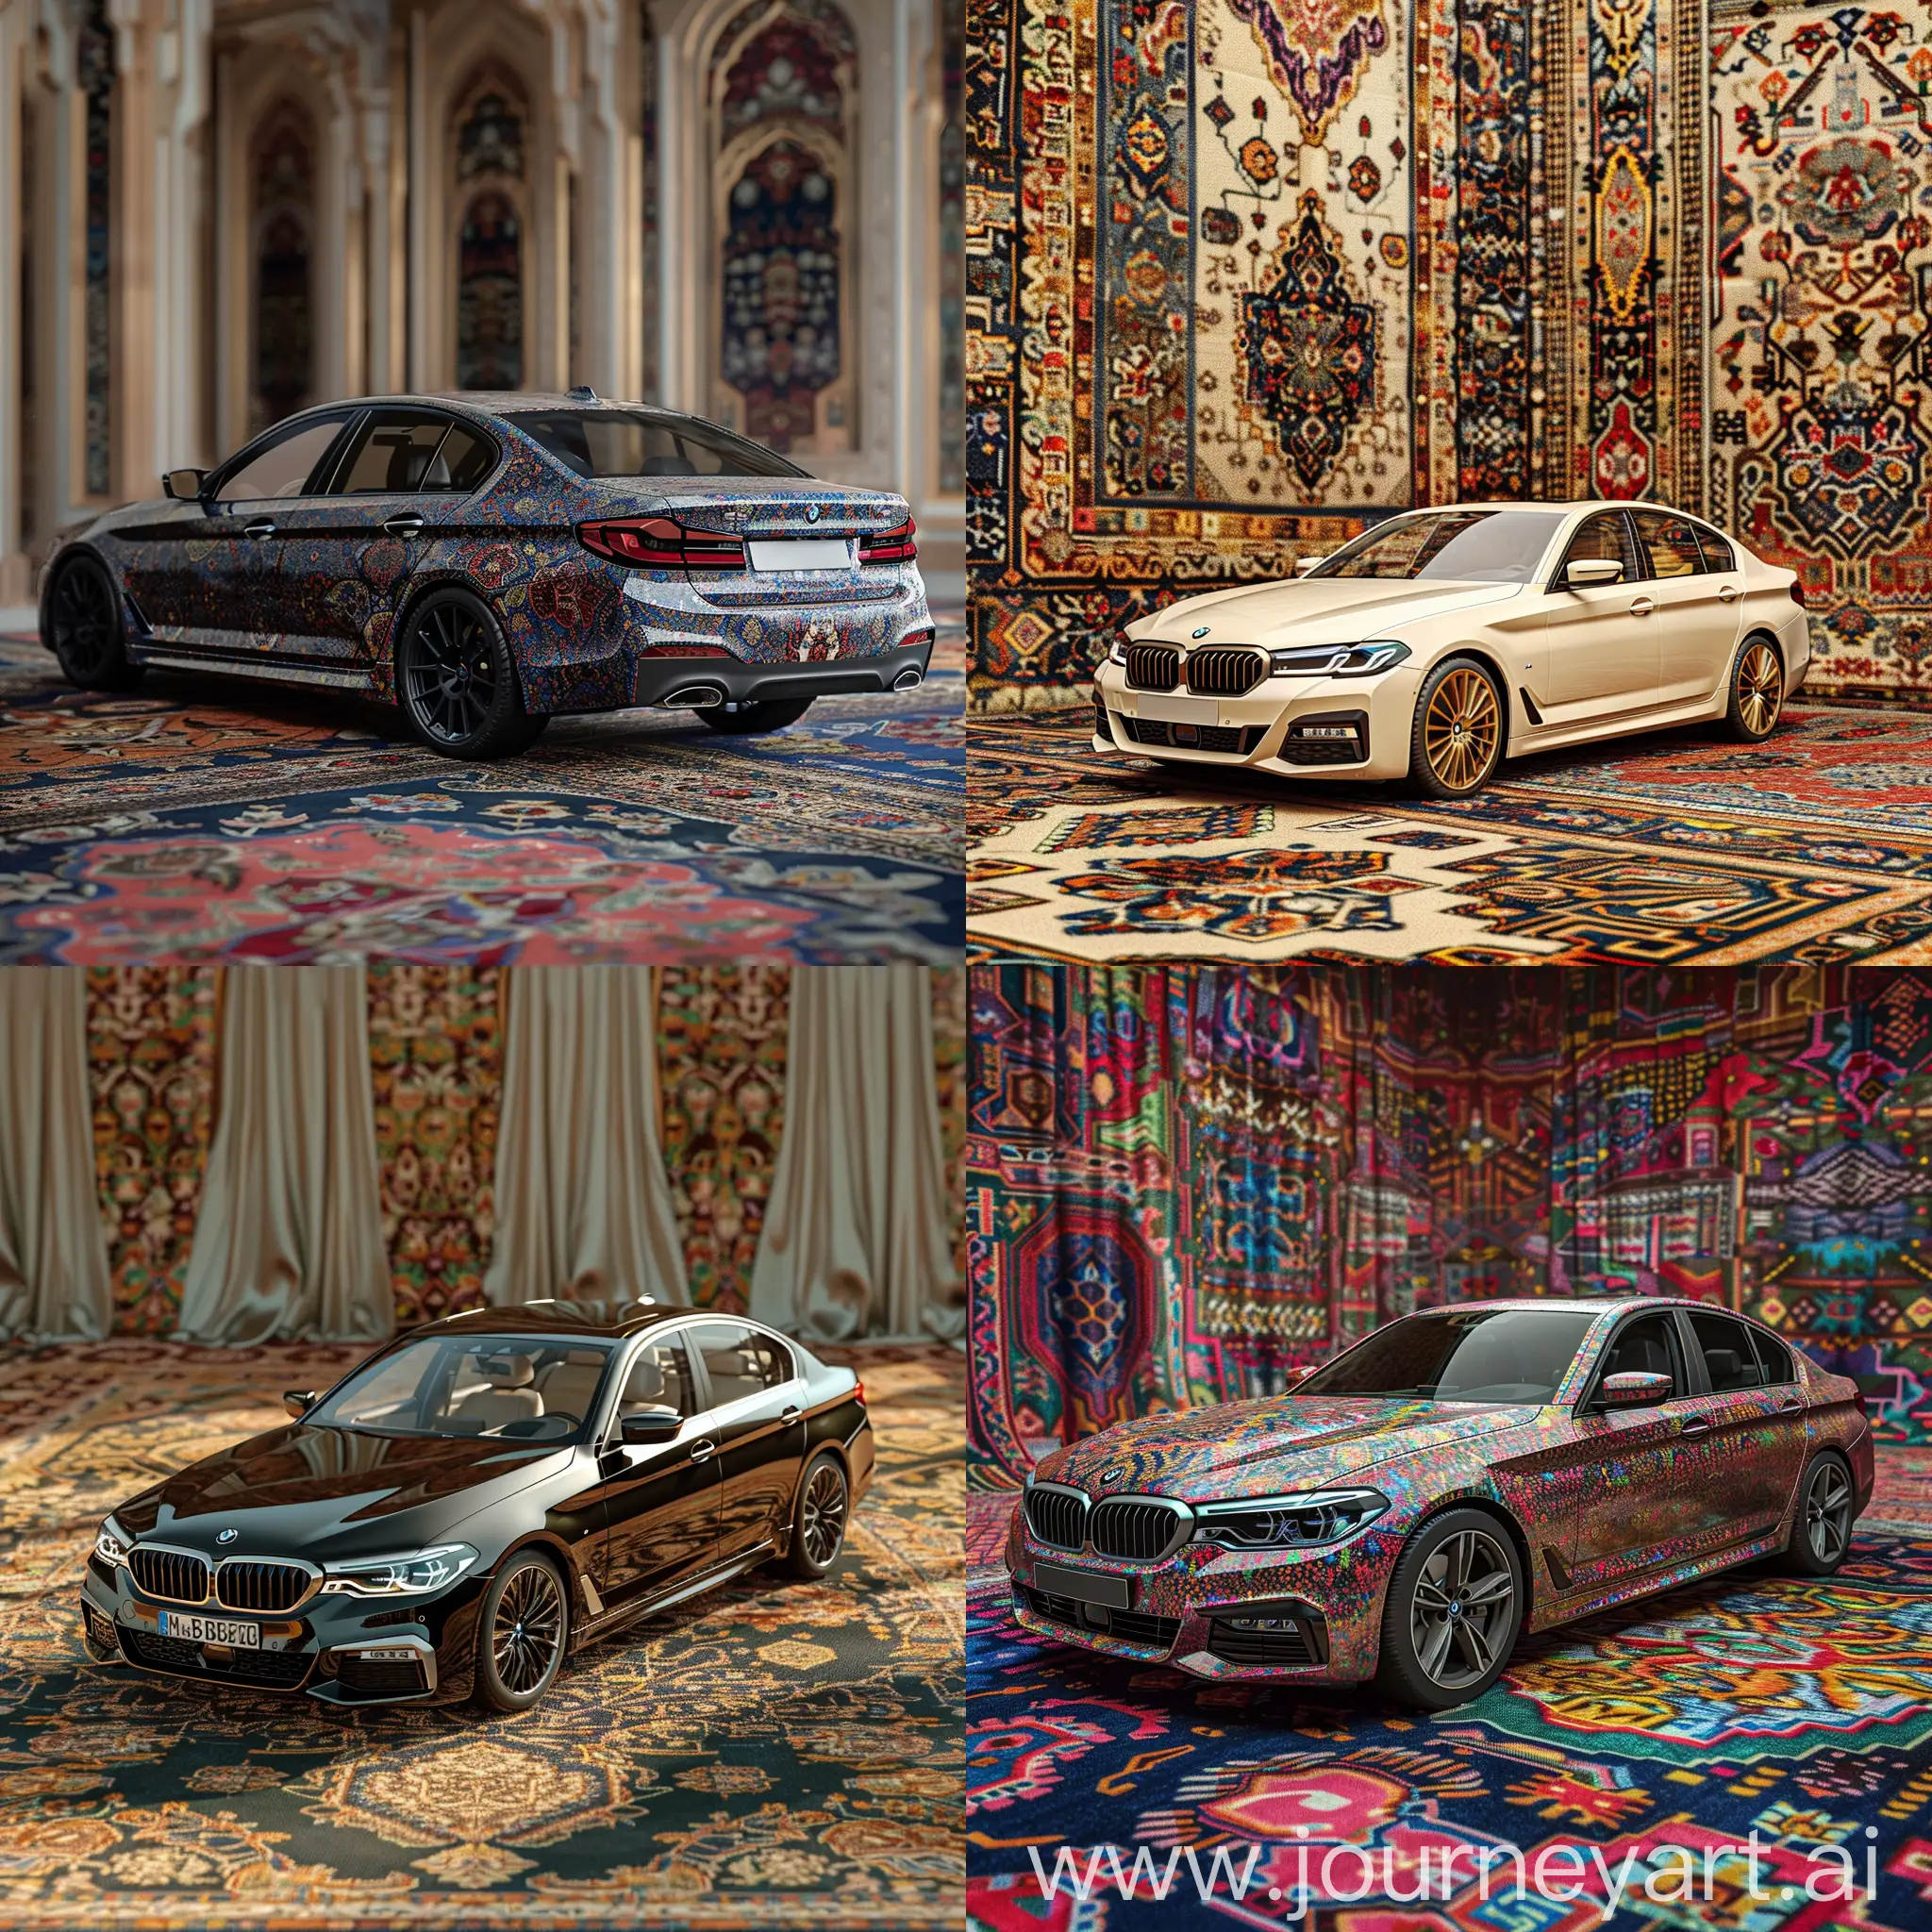 Design the bmw 530 car with Iranian carpet designs in a completely natural way, the background is Iranian carpet, very real, 3d, exhibition angle